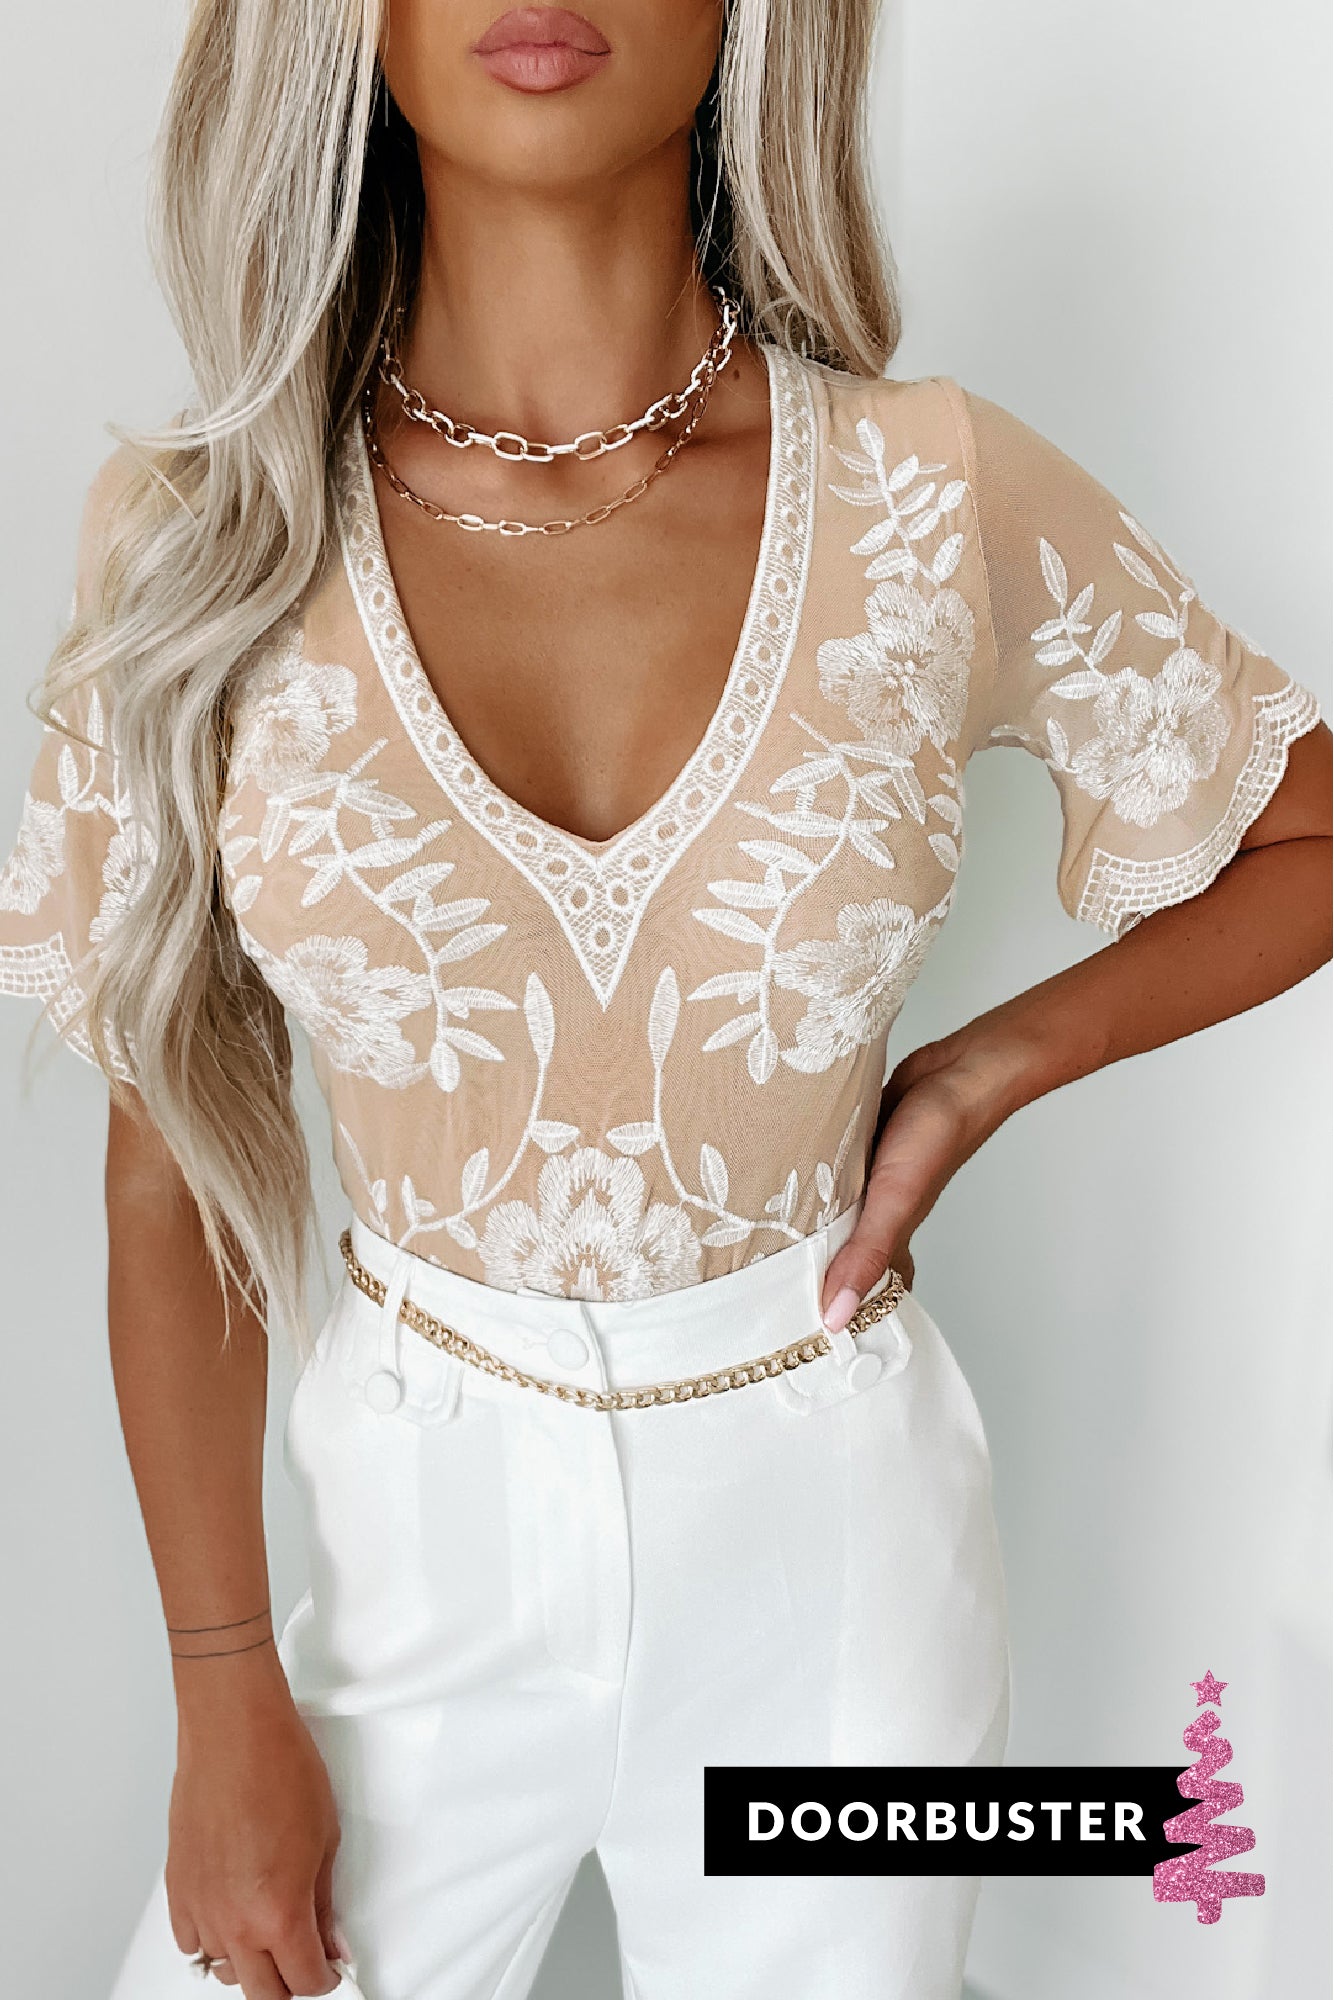 Follow Your Fancy Embroidered Bodysuit (Nude/White) - NanaMacs